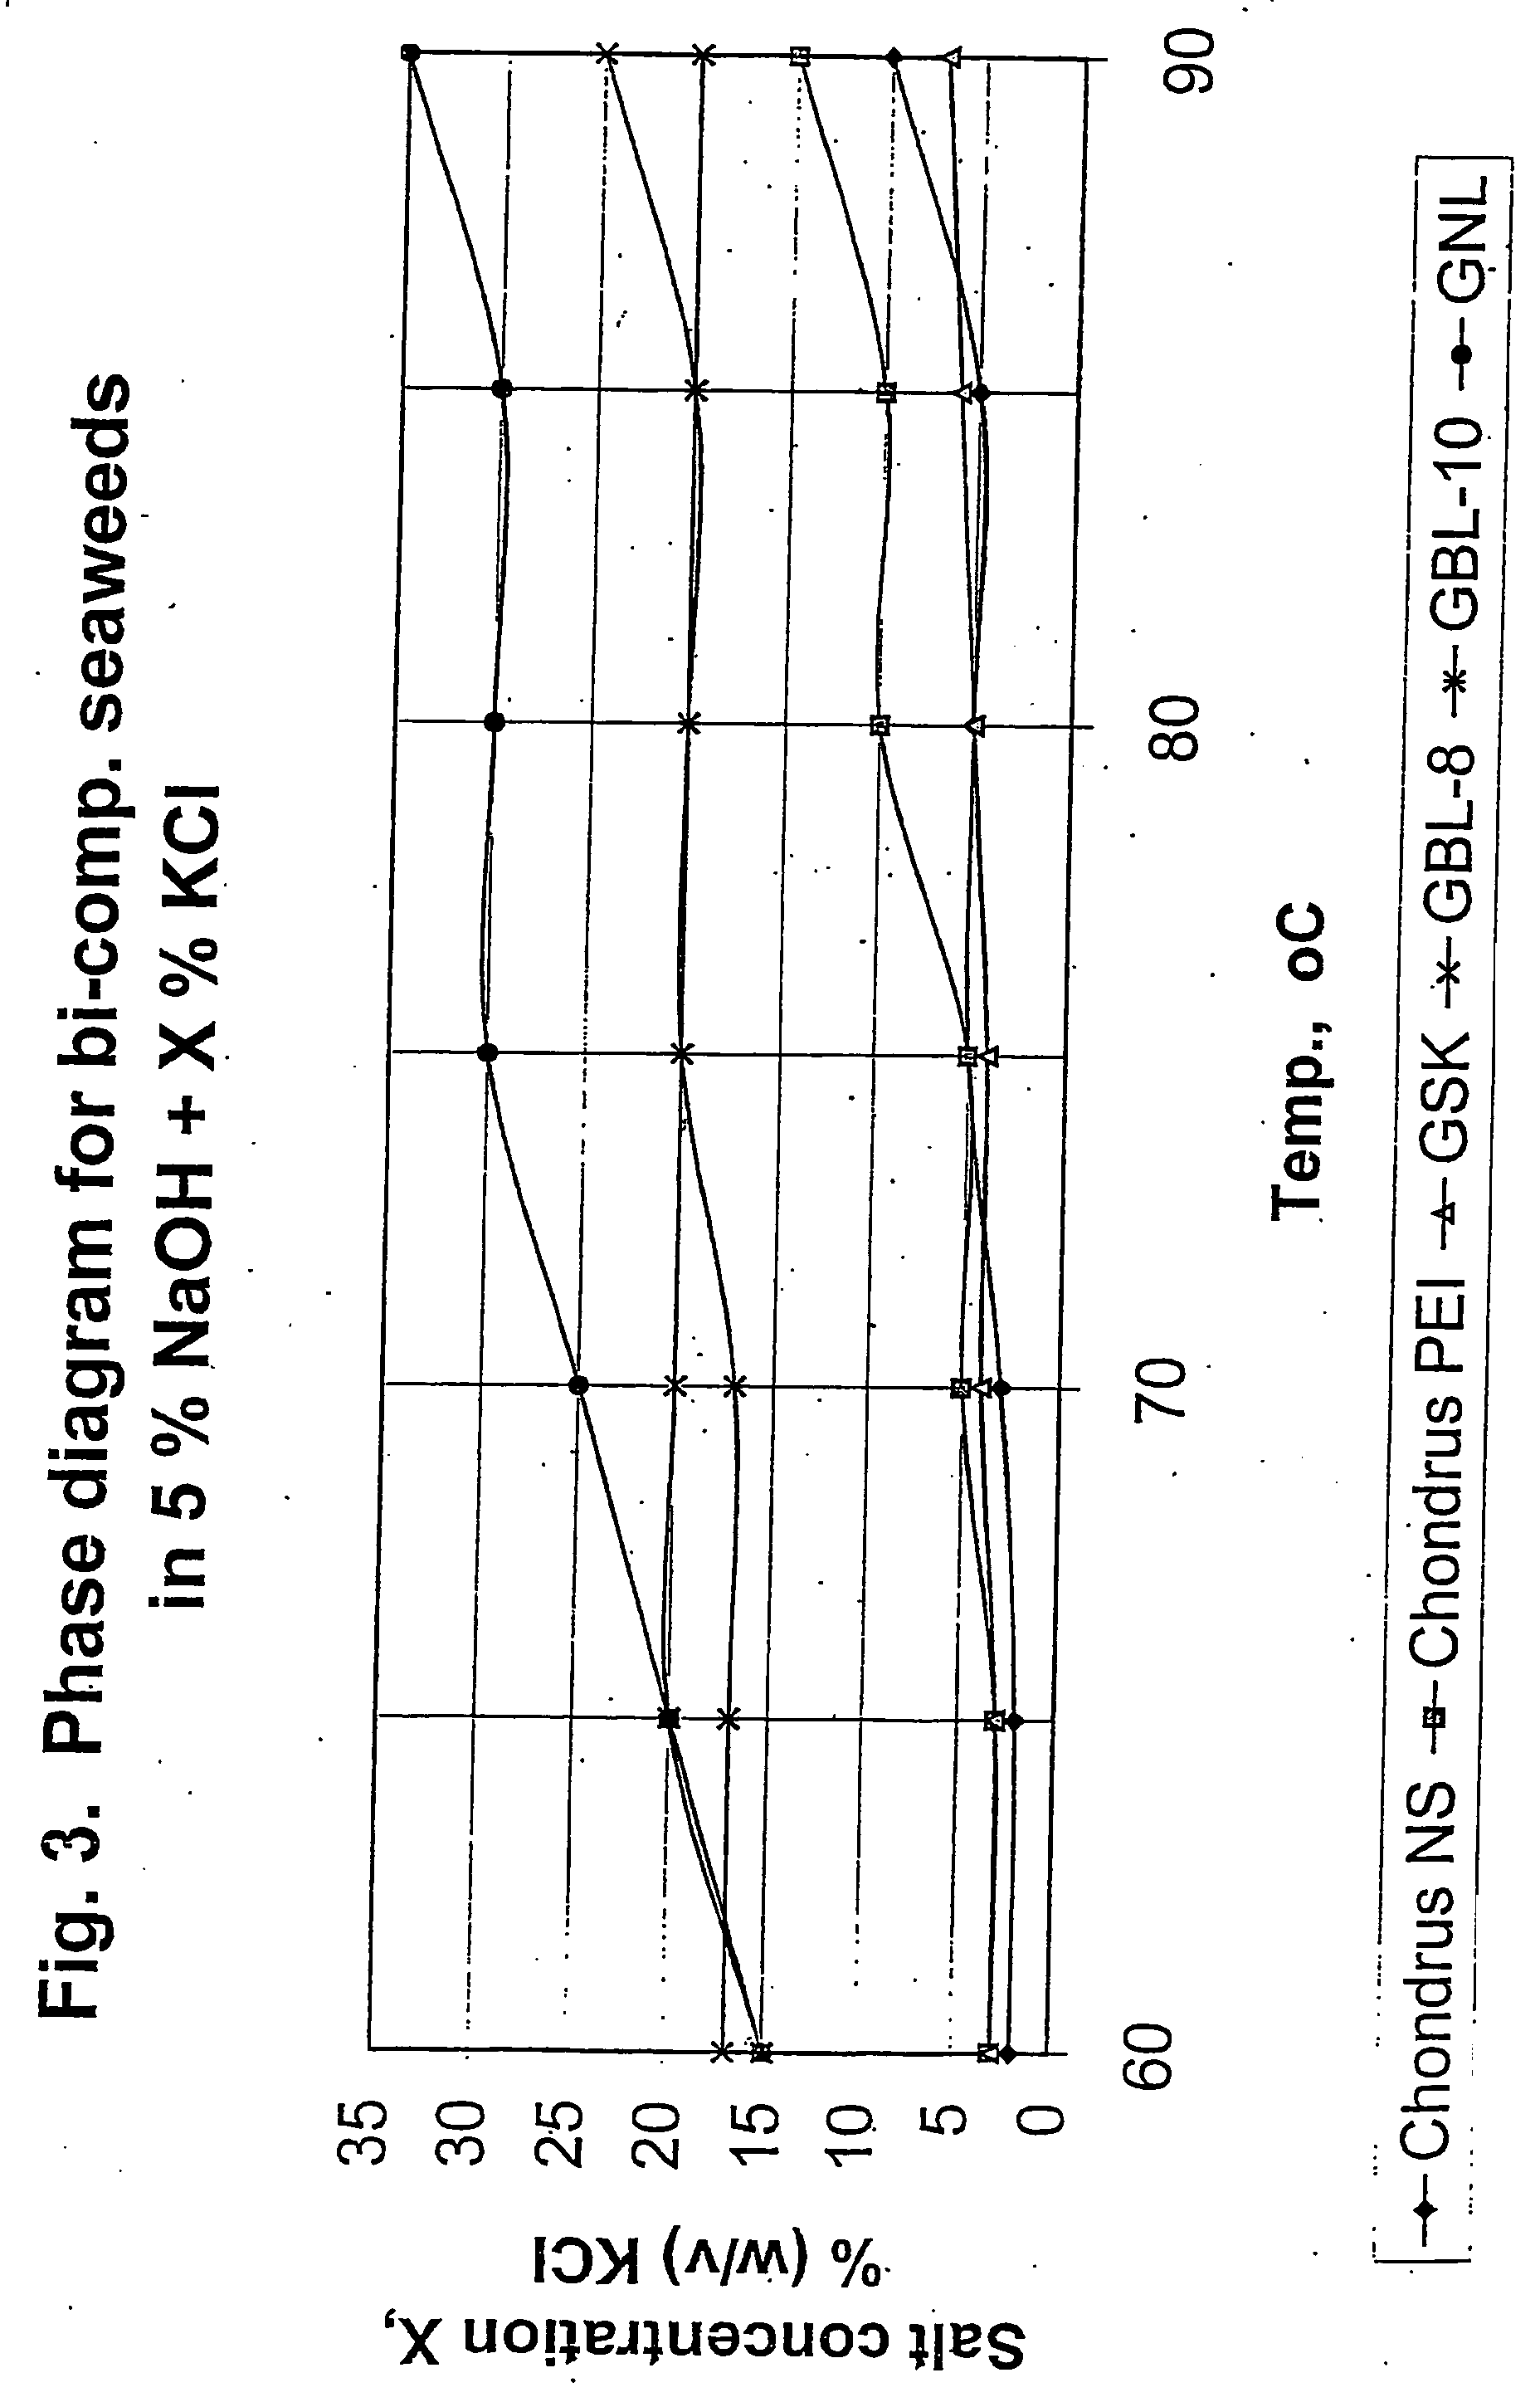 Method for manufacturing and fractionating gelling and non-gelling carrageenans from bi-component seaweed